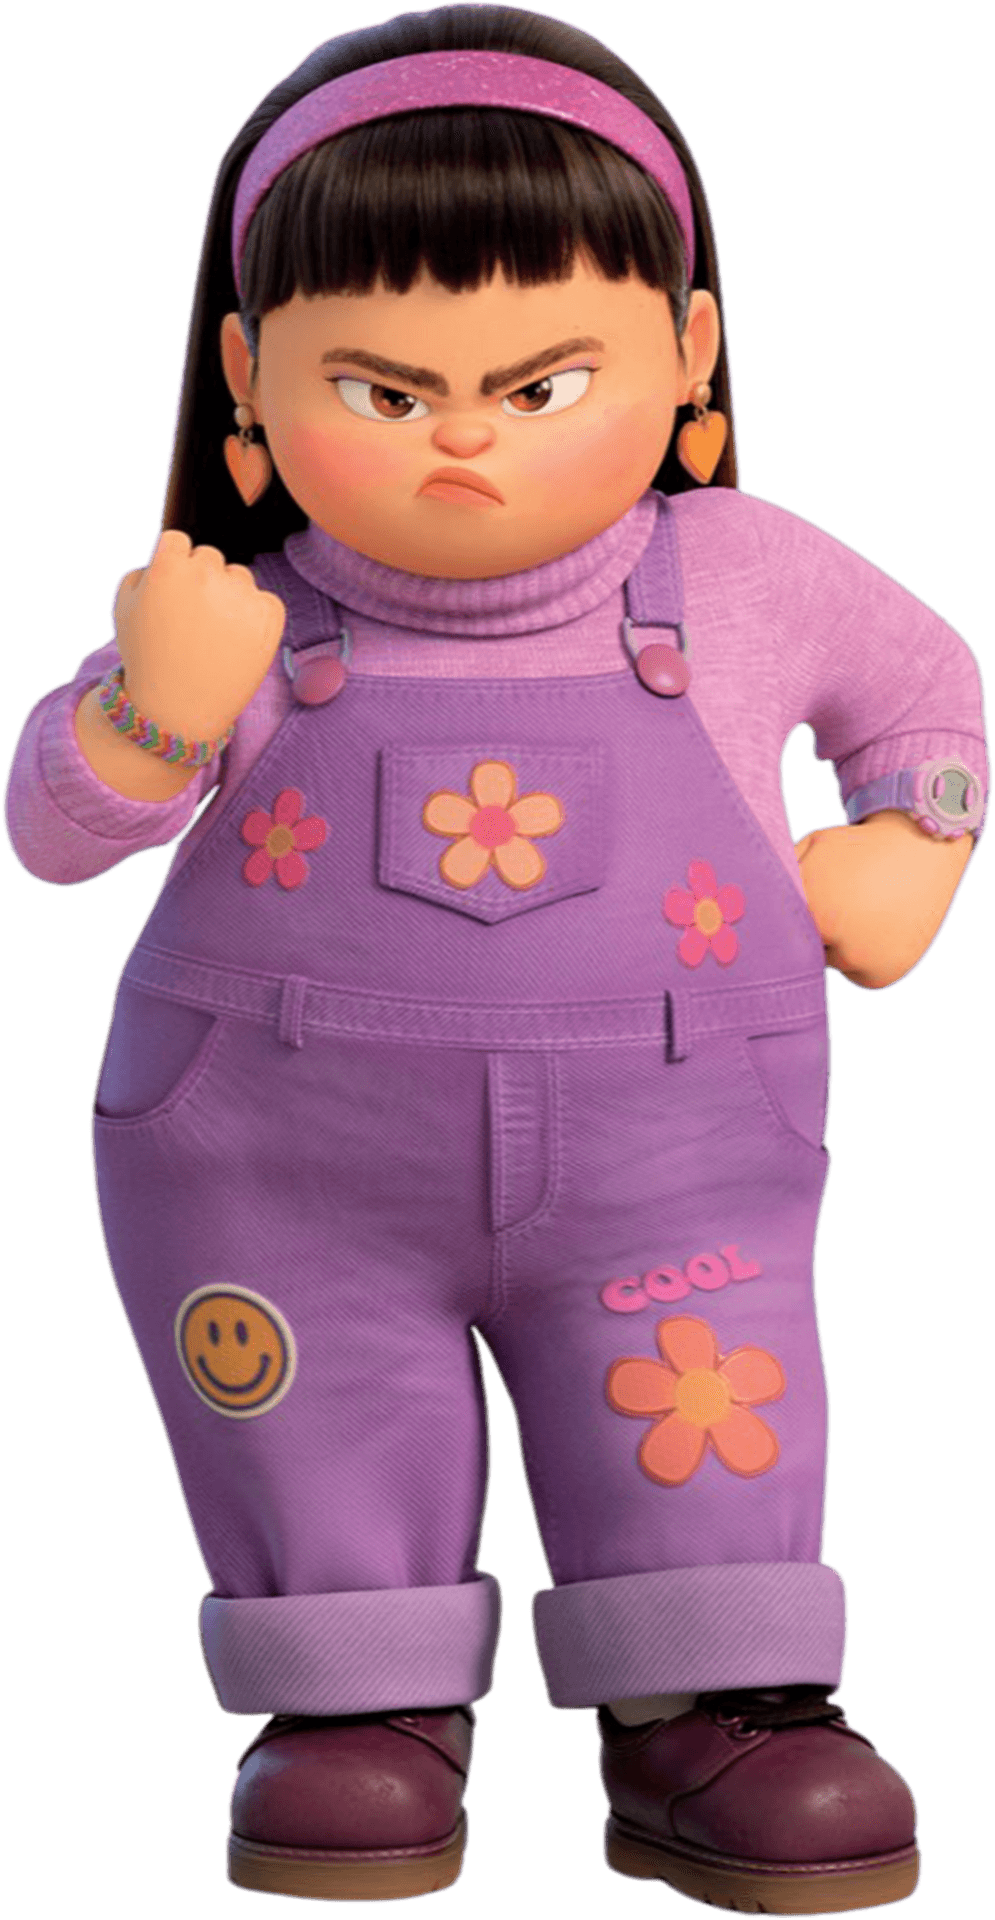 Download A Girl In Purple Overalls Is Pointing Her Finger | Wallpapers.com